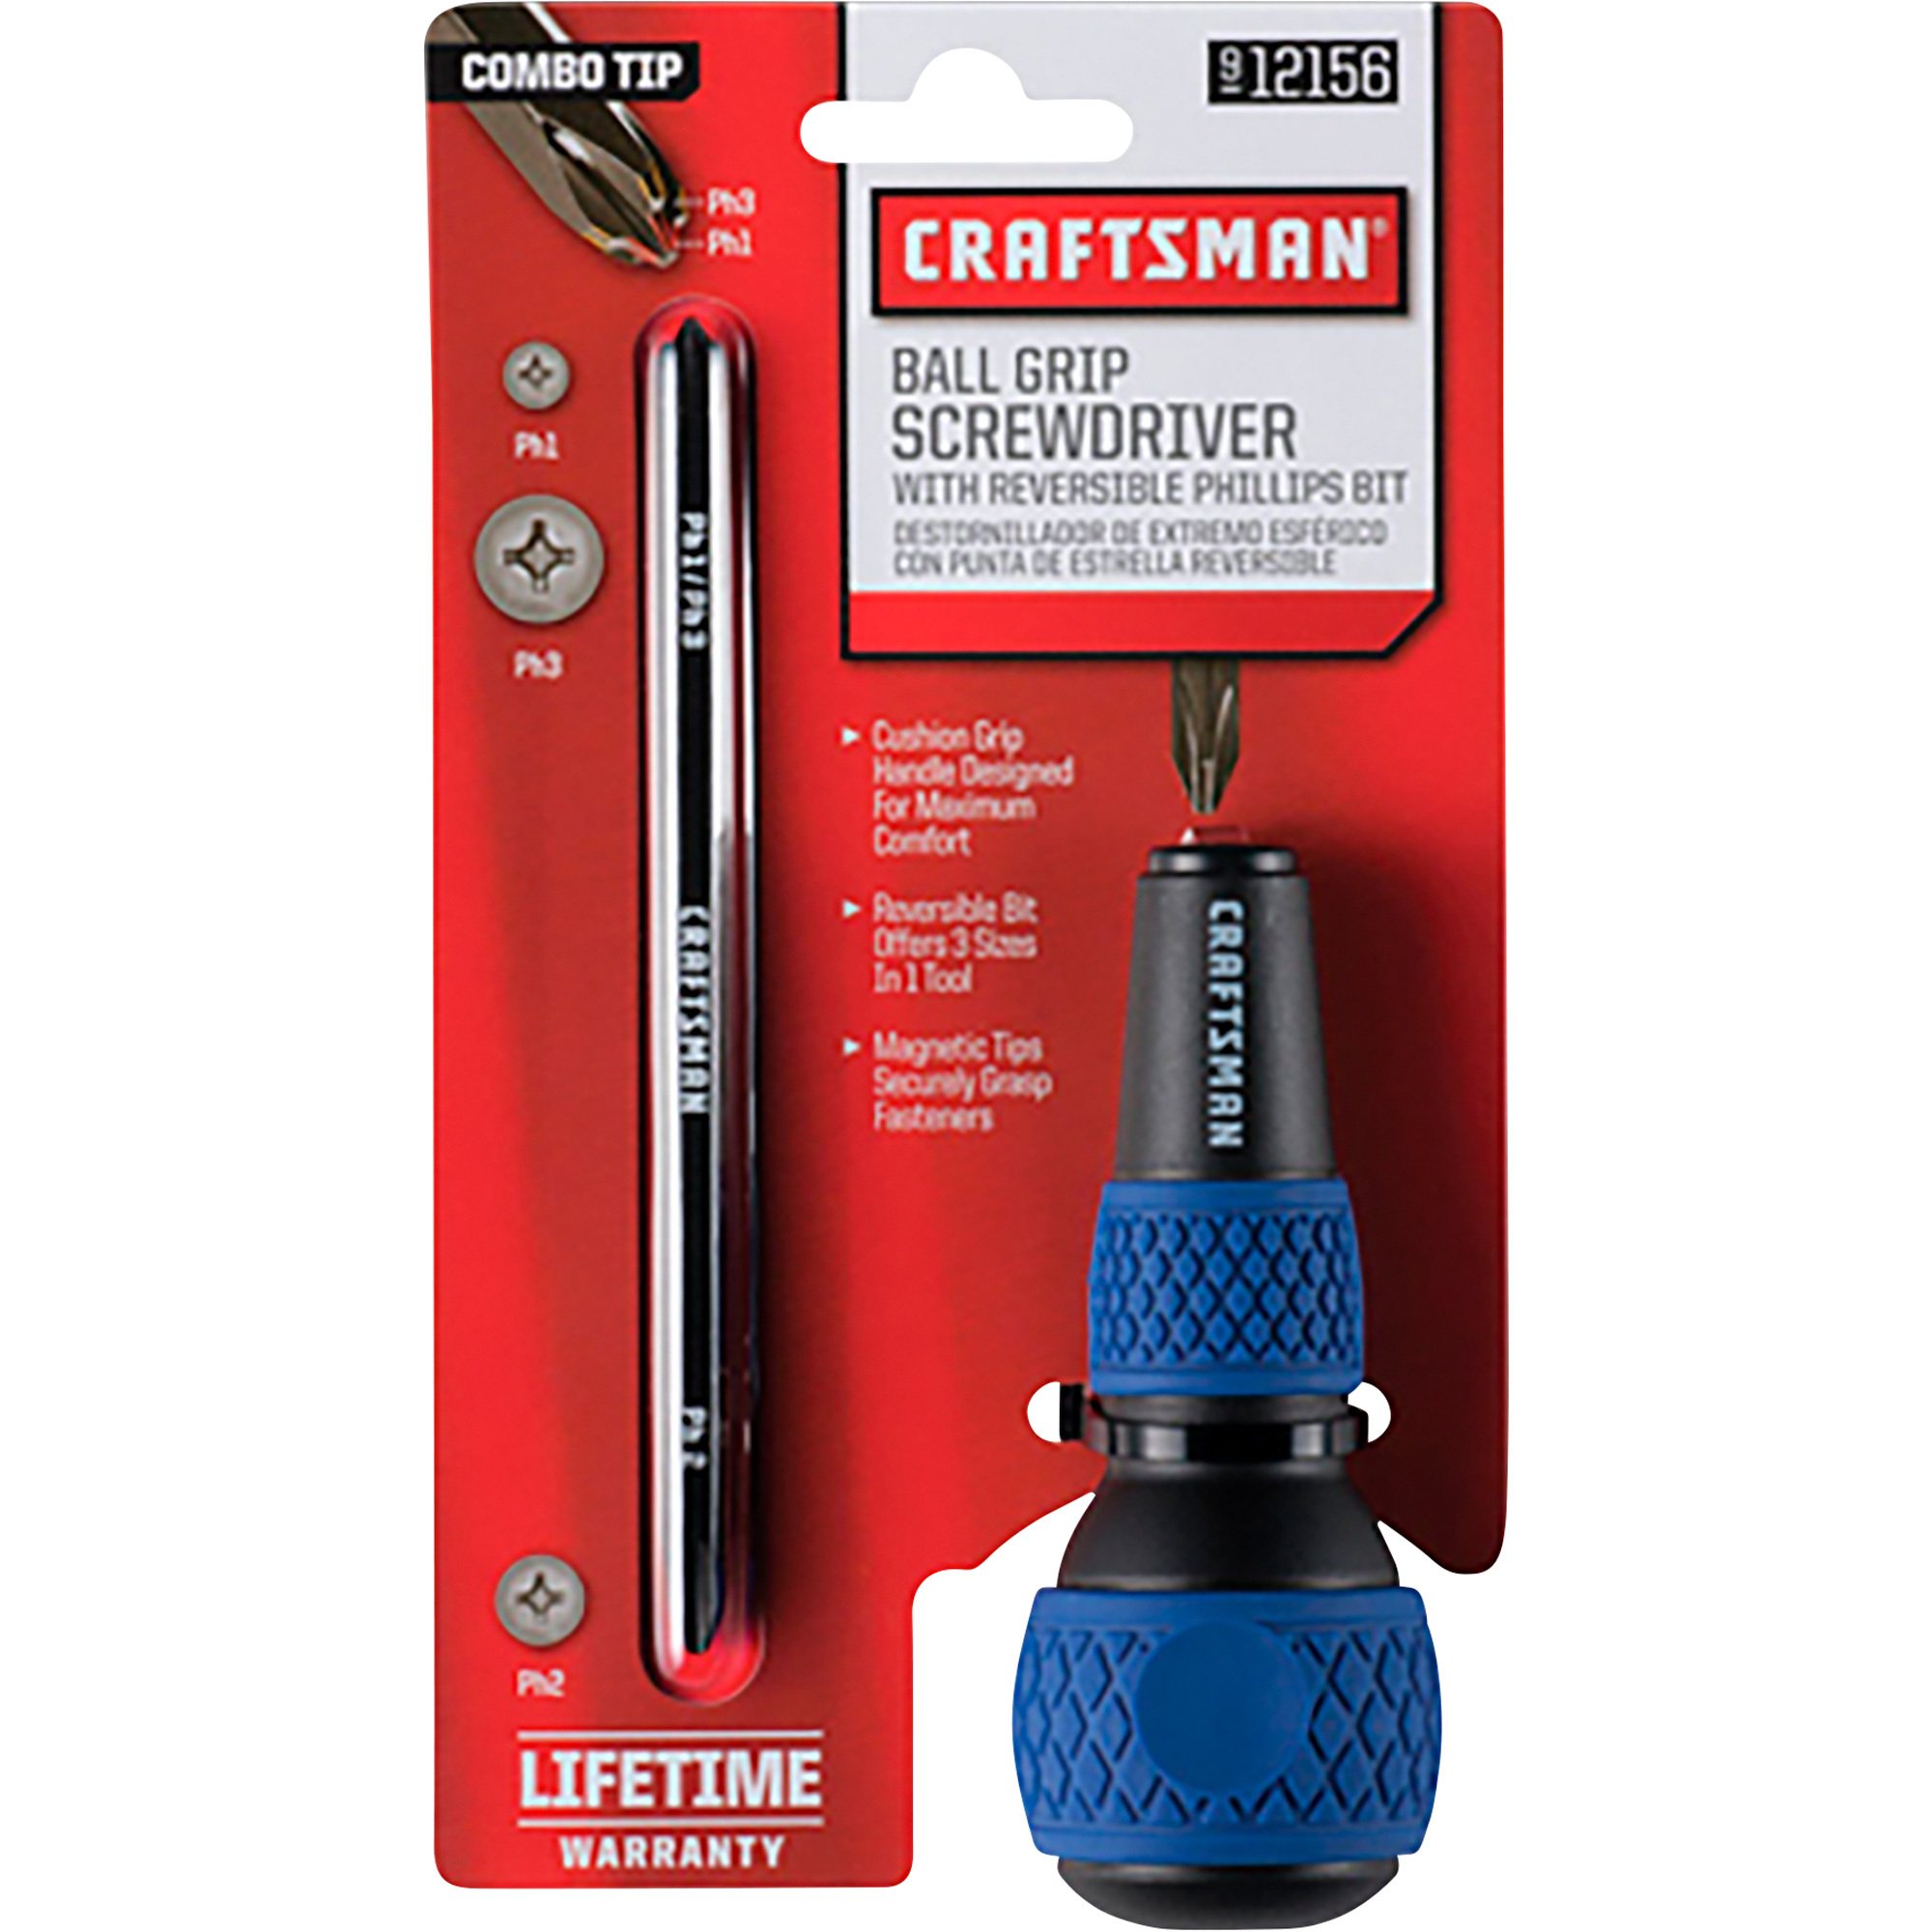 Craftsman Ball Grip Screwdriver with Reversible Philips Bit — Blue